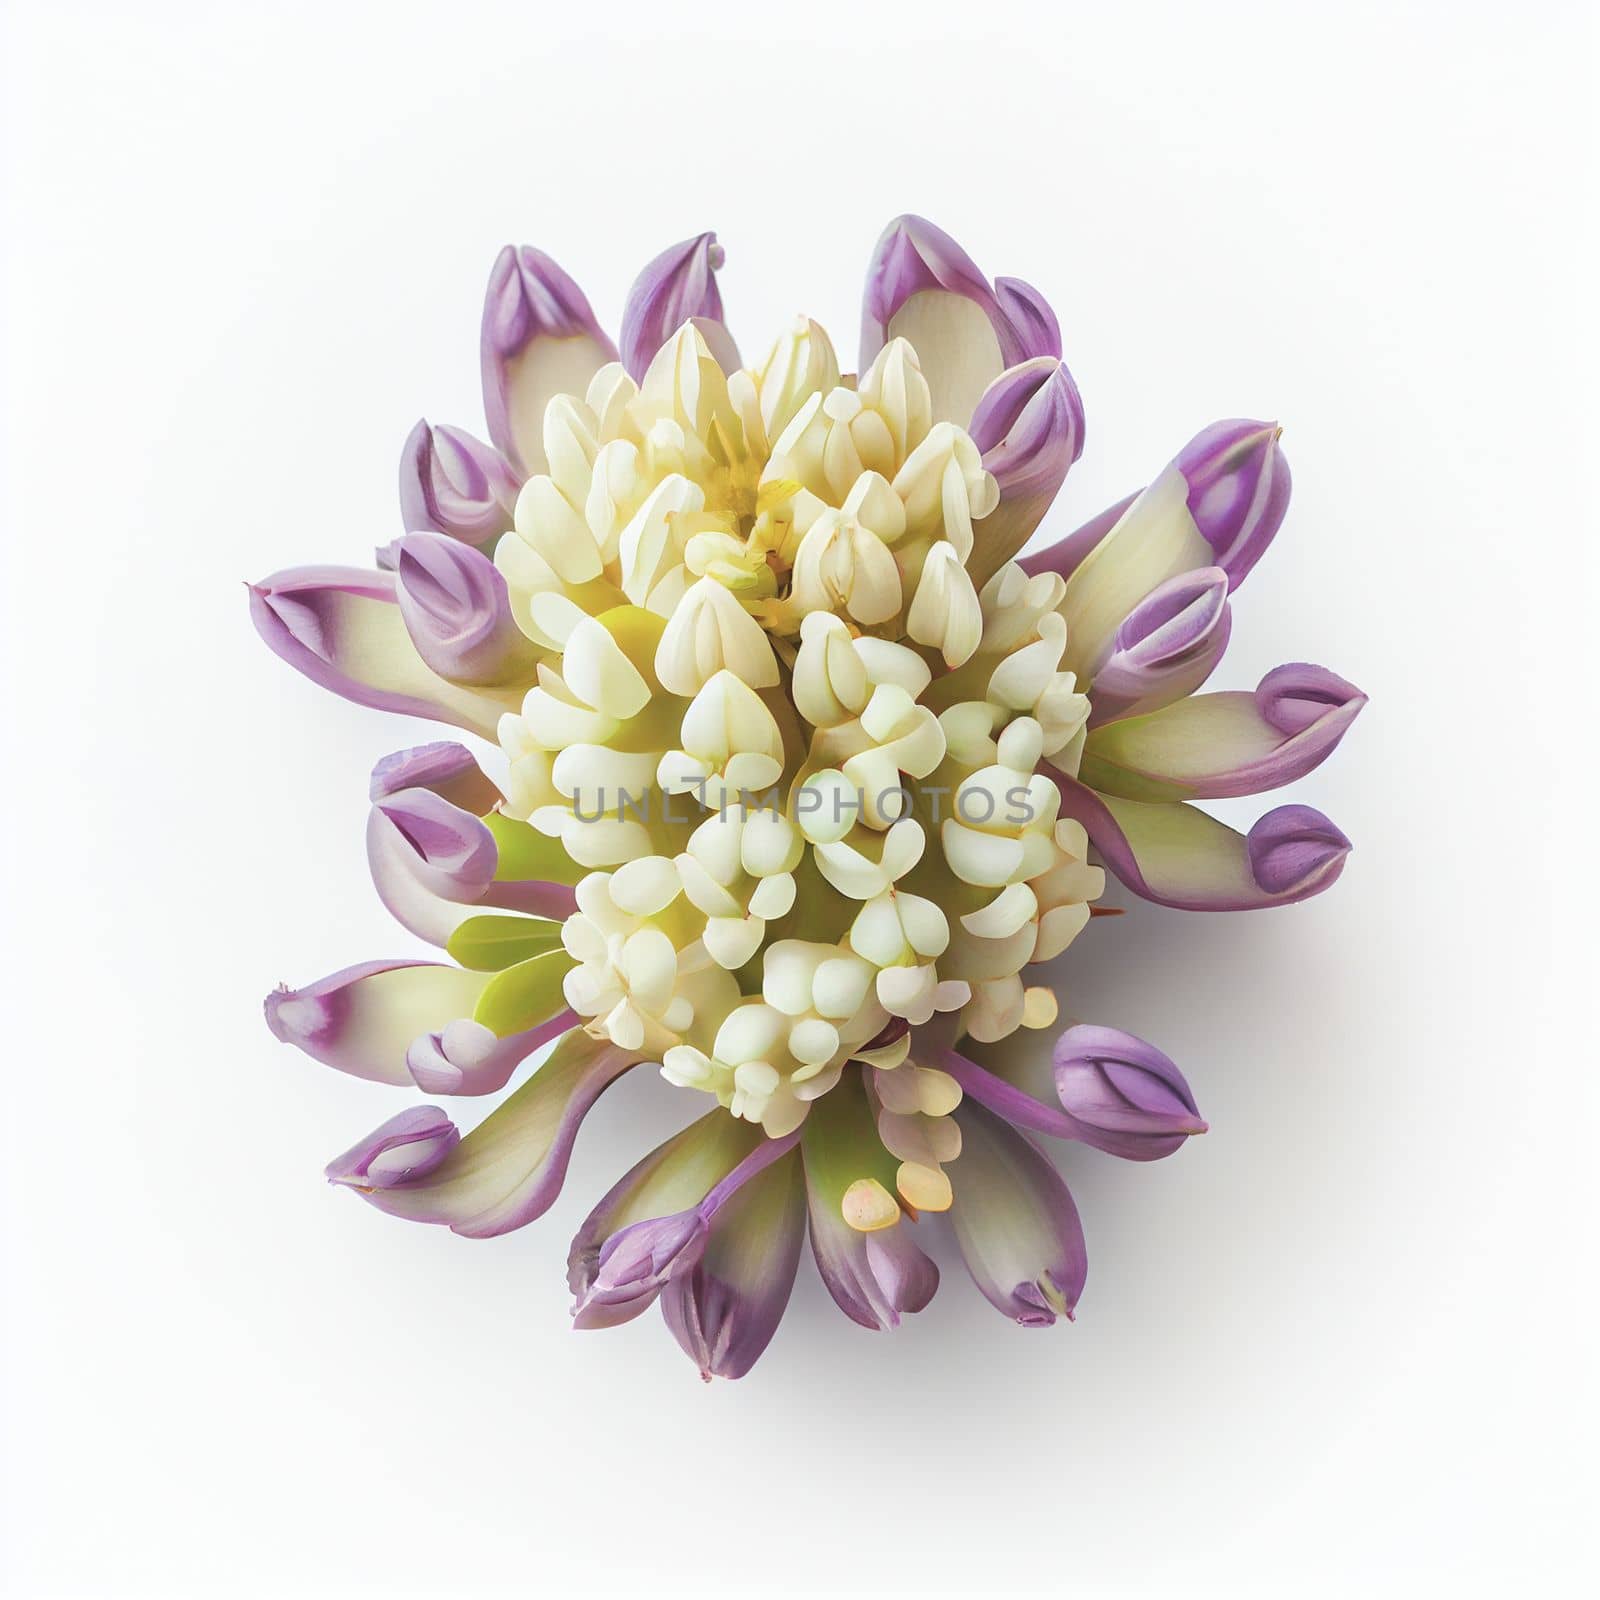 Top view a Hyacinth flower isolated on a white background, suitable for use on Valentine's Day cards, love letters, or springtime designs.